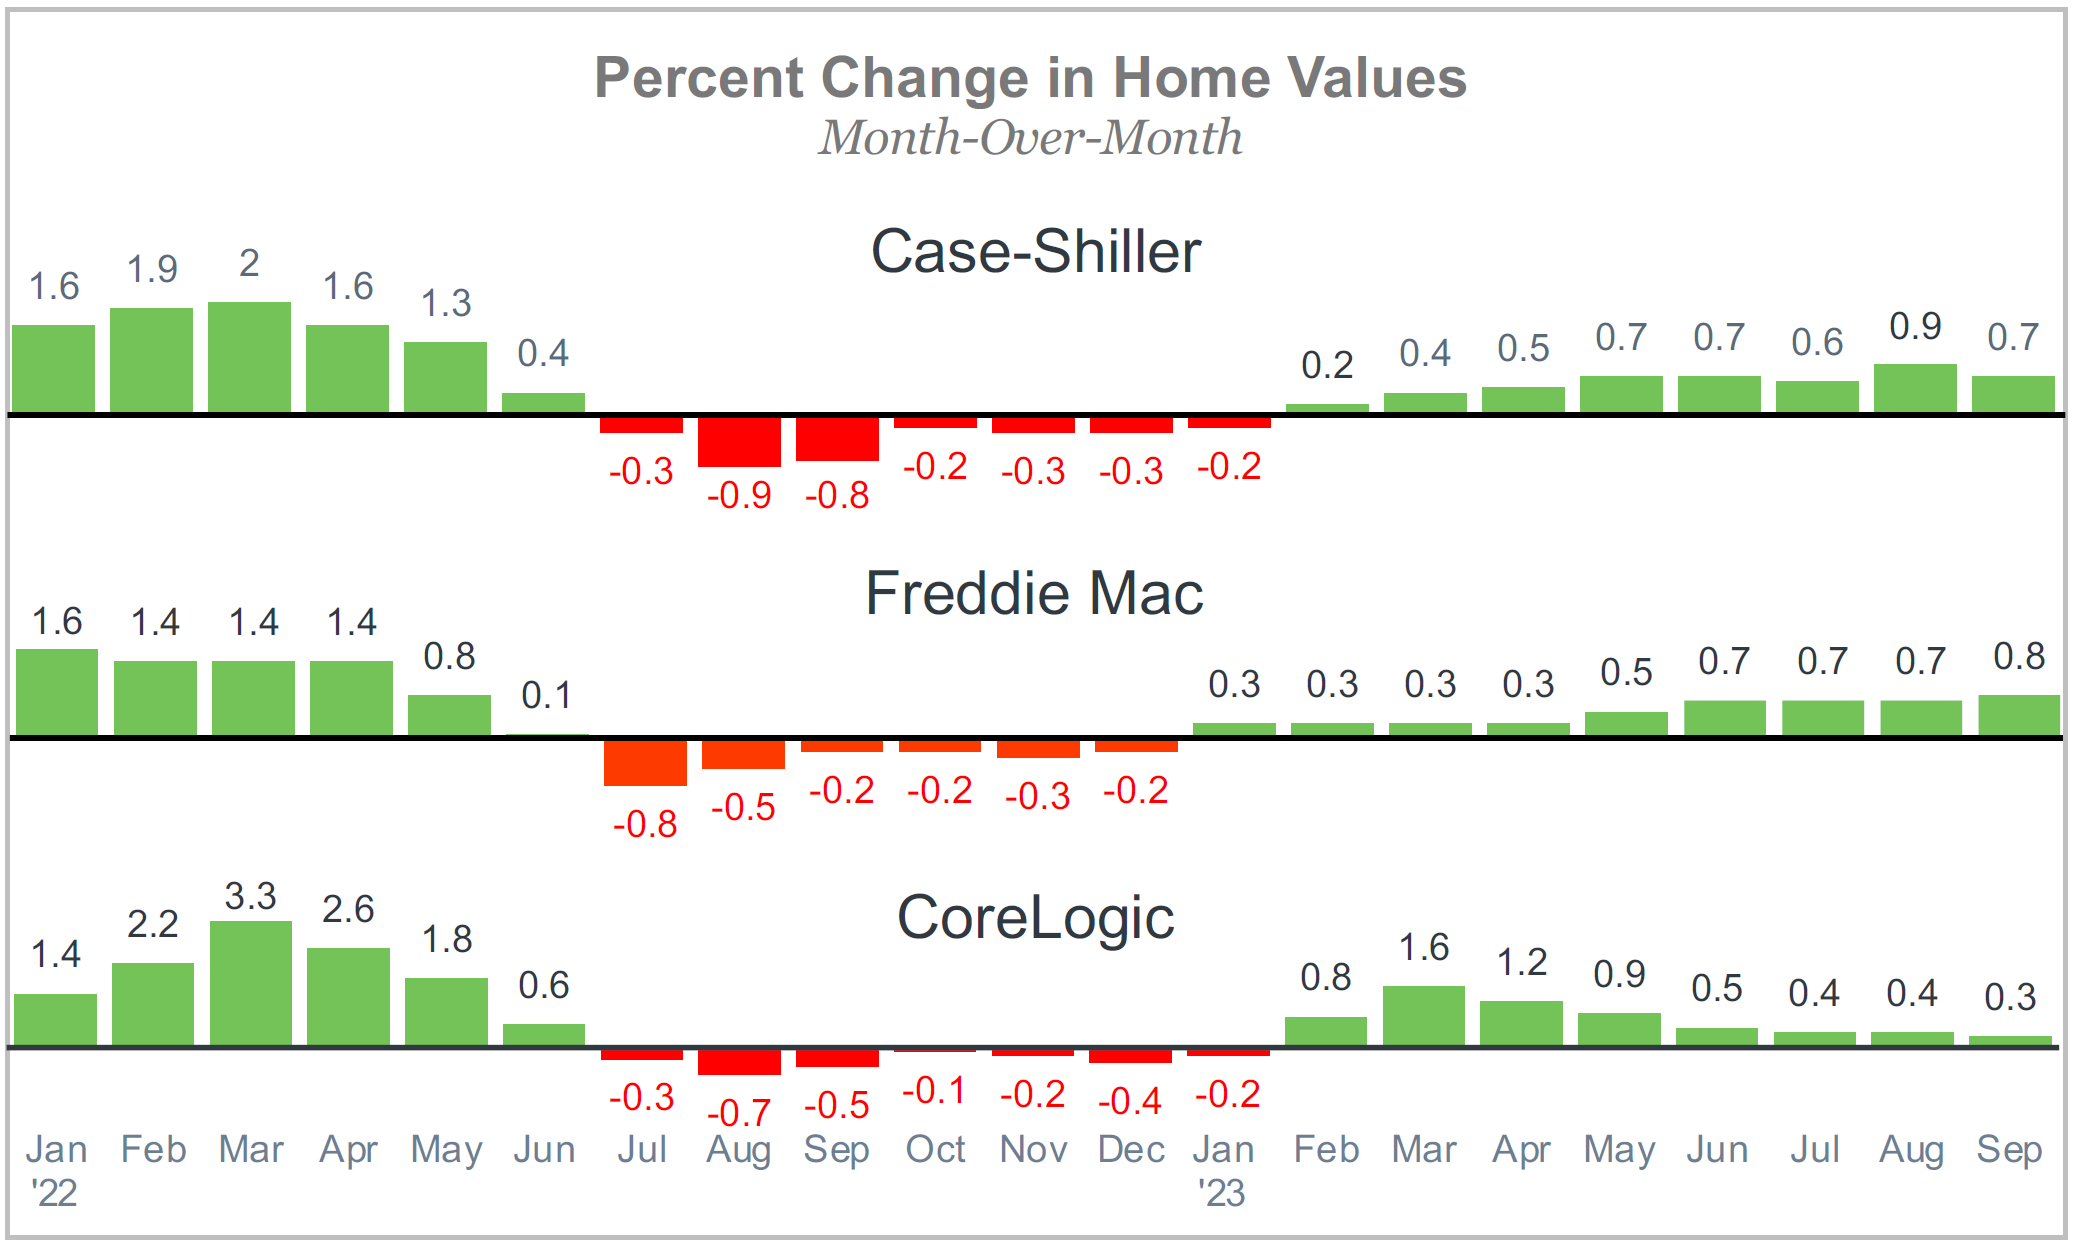 Percent Change in Home Values